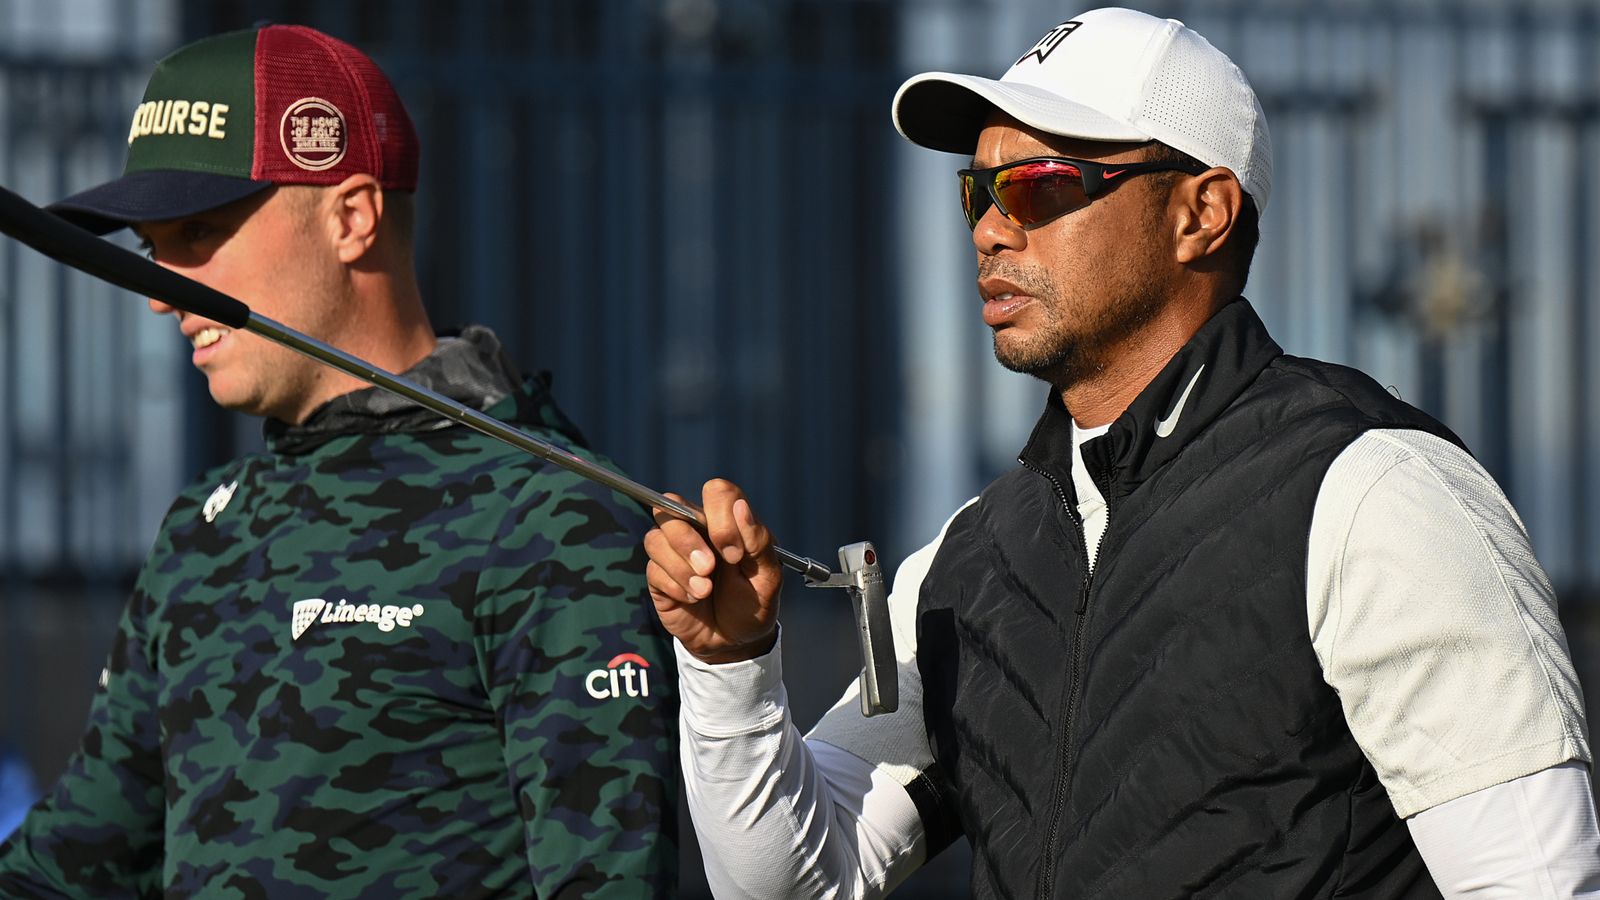 The 150th Open: Tiger Woods’ last time at St Andrews? Major win for Rory McIlroy? Storylines to follow